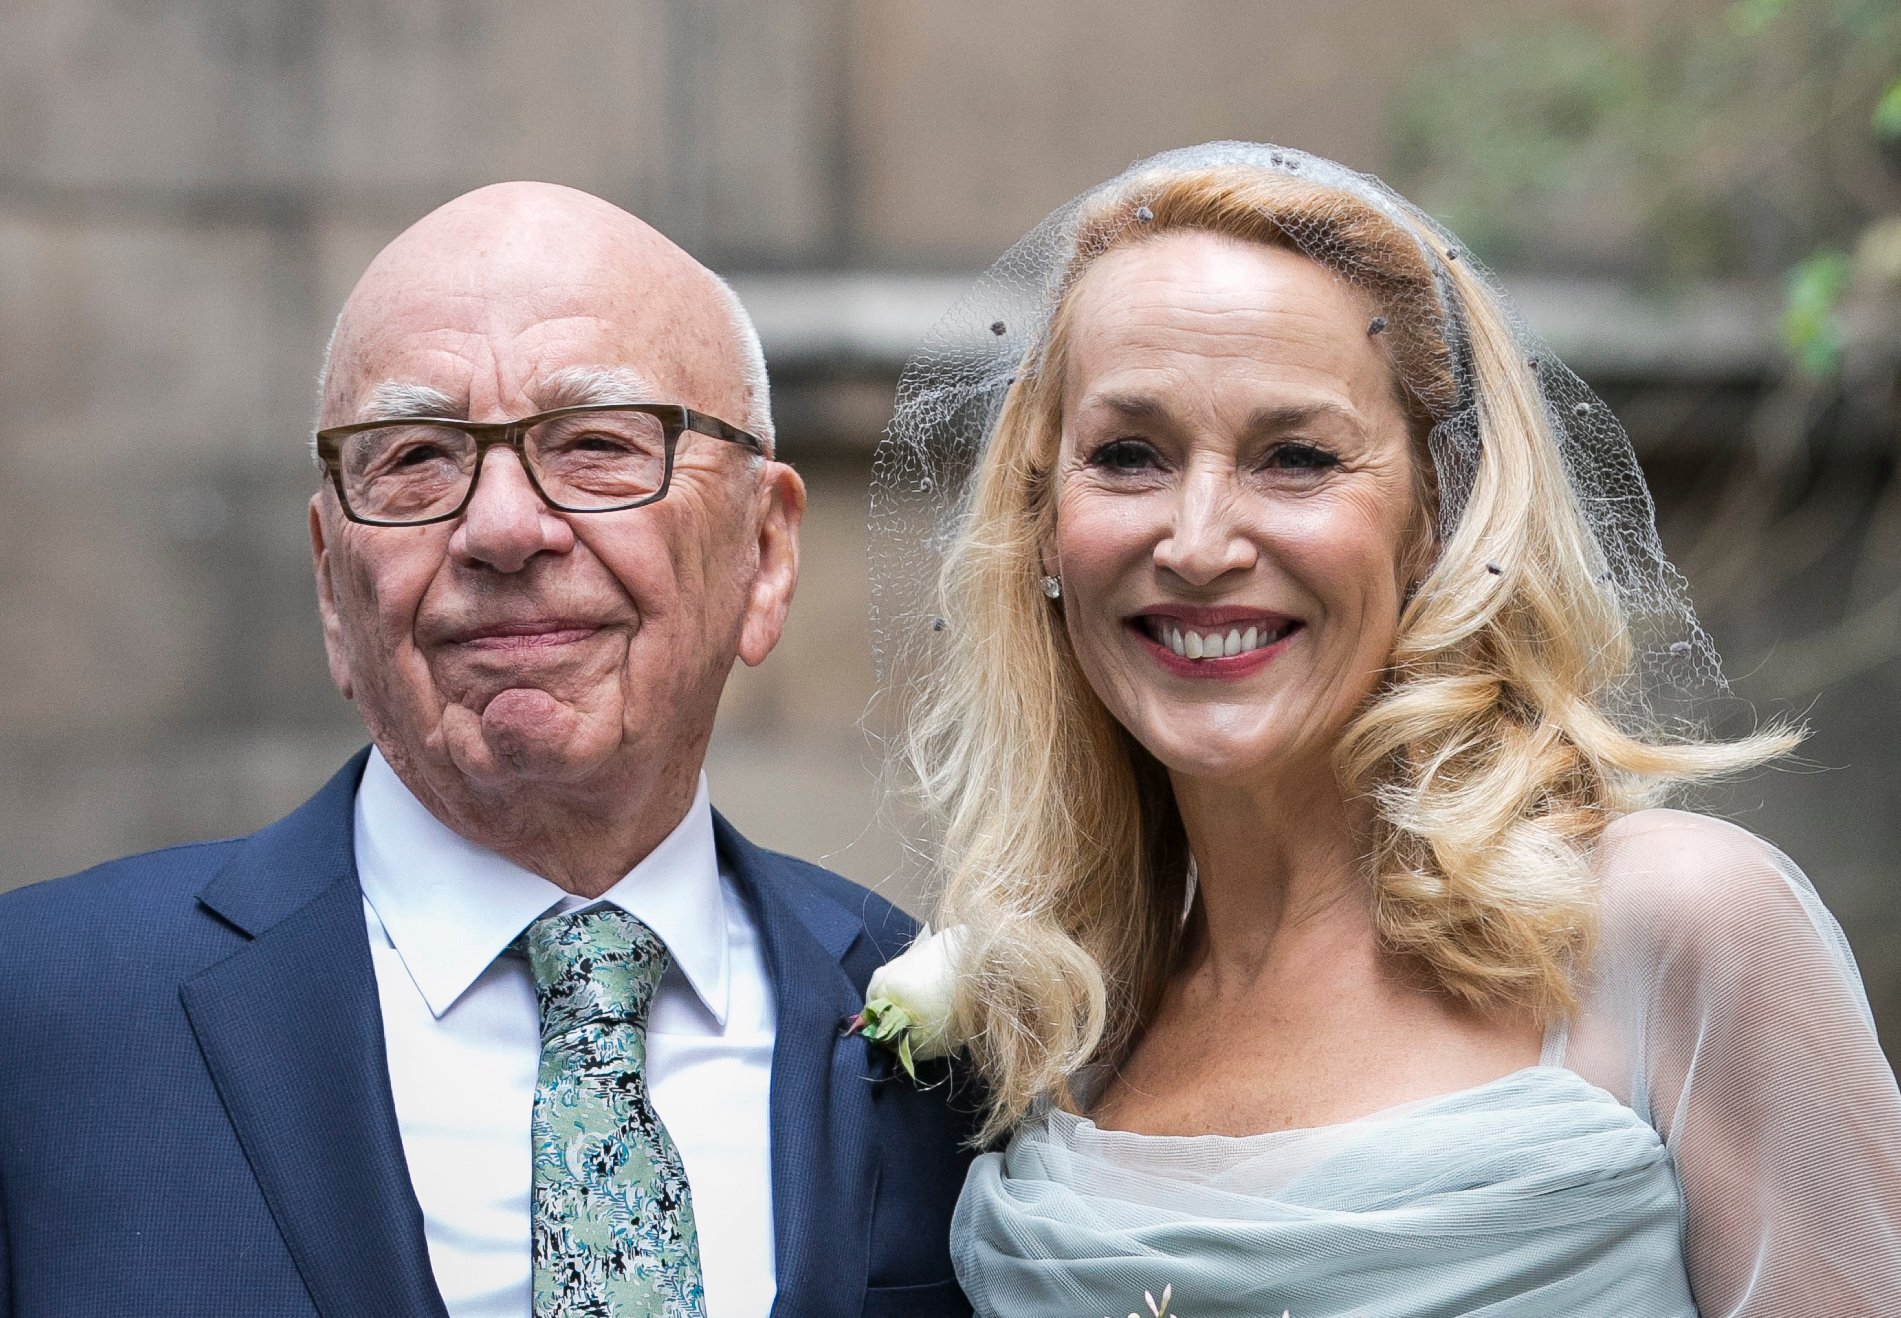 Rupert Murdoch and Jerry Hall seen leaving St Brides Church after their wedding on March 5, 2016 in London, England. (Photo by John Phillips/Getty Images)